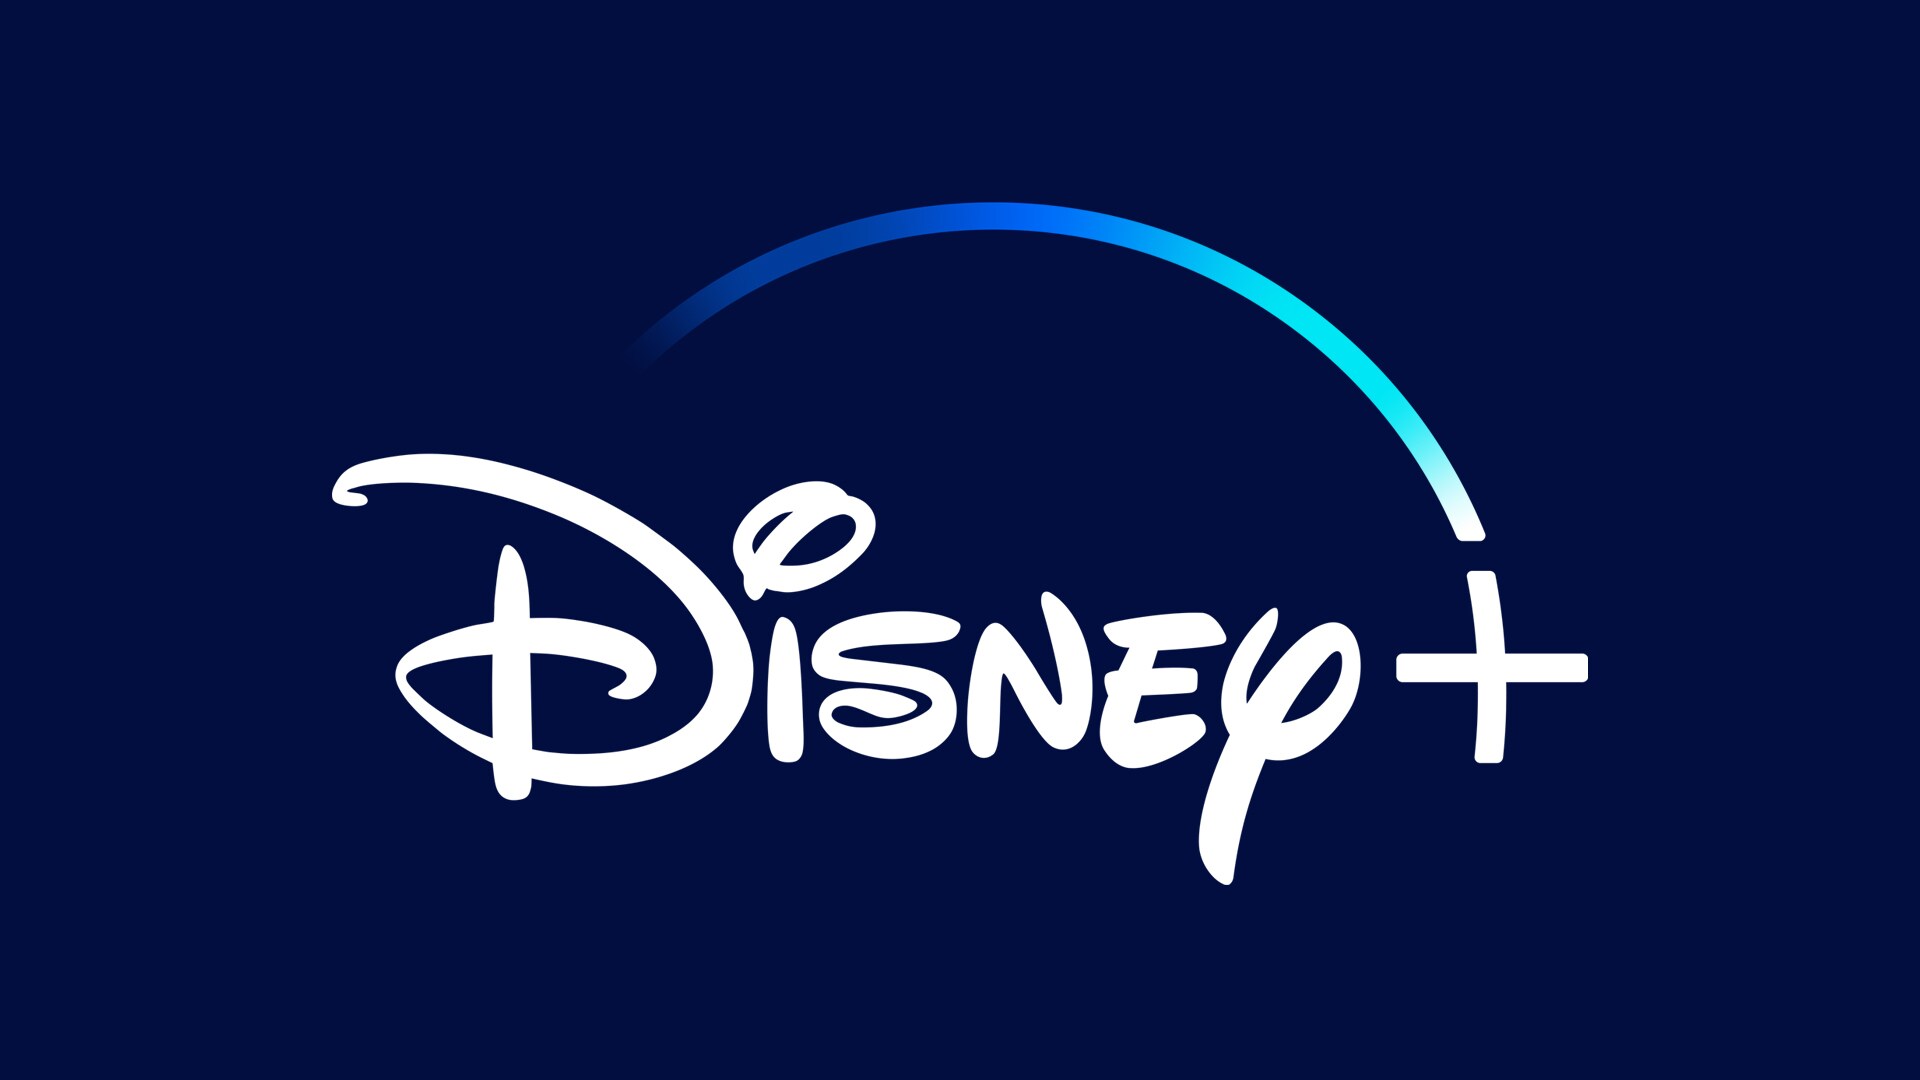 DISNEY+ DEBUTS TRAILER FOR NEW ORIGINAL SERIES, FX’S “FLEISHMAN IS IN TROUBLE,” STREAMING EXCLUSIVELY ON FEBRUARY 22 IN THE U.K.